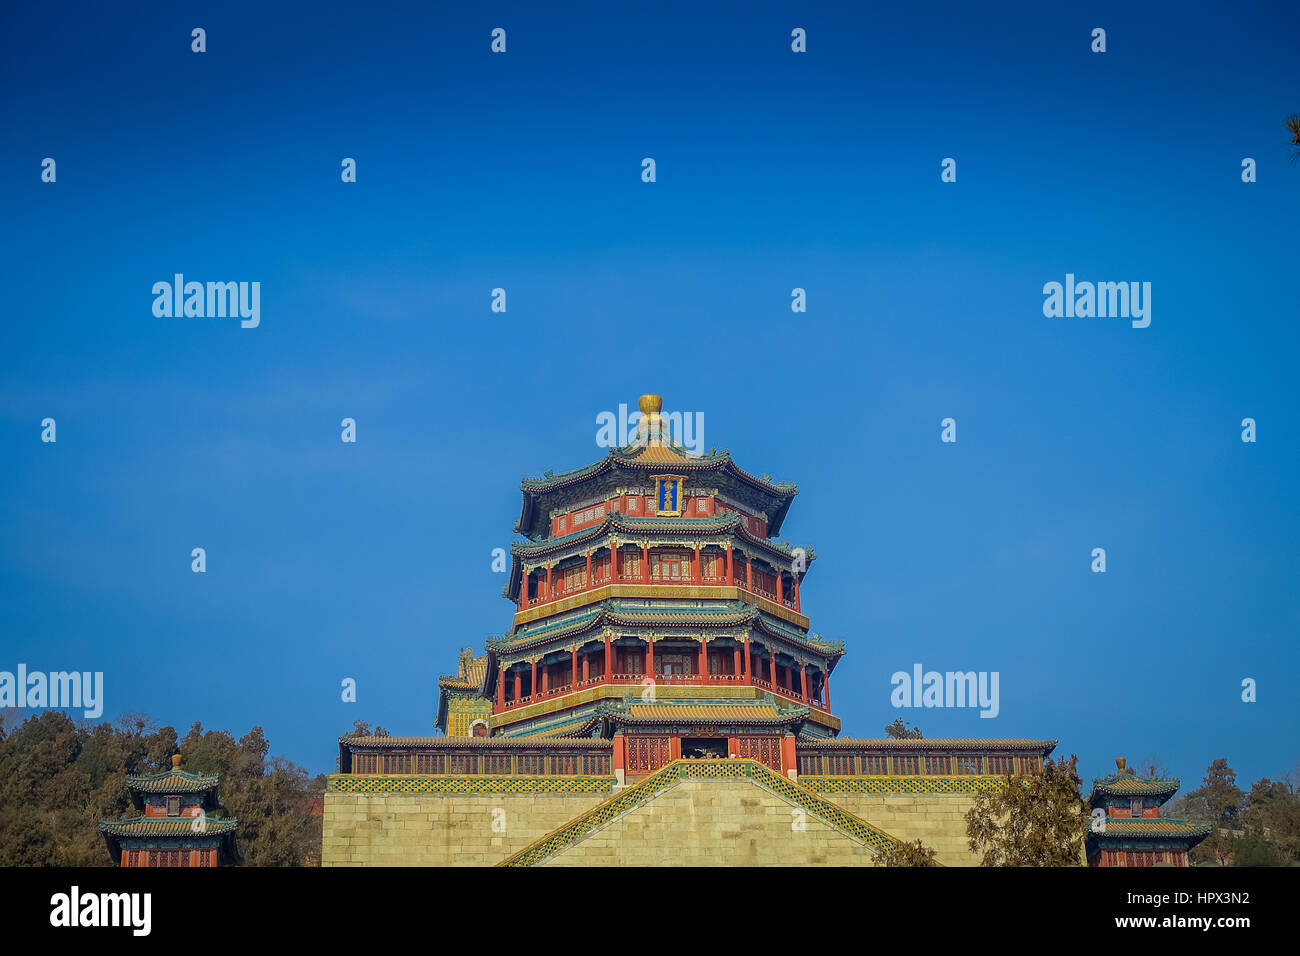 BEIJING, CHINA - 29 JANUARY, 2017: Walking around spring palace complex, a spectacular ensemble of lakes, gardens and ancient chinese palaces, beautif Stock Photo